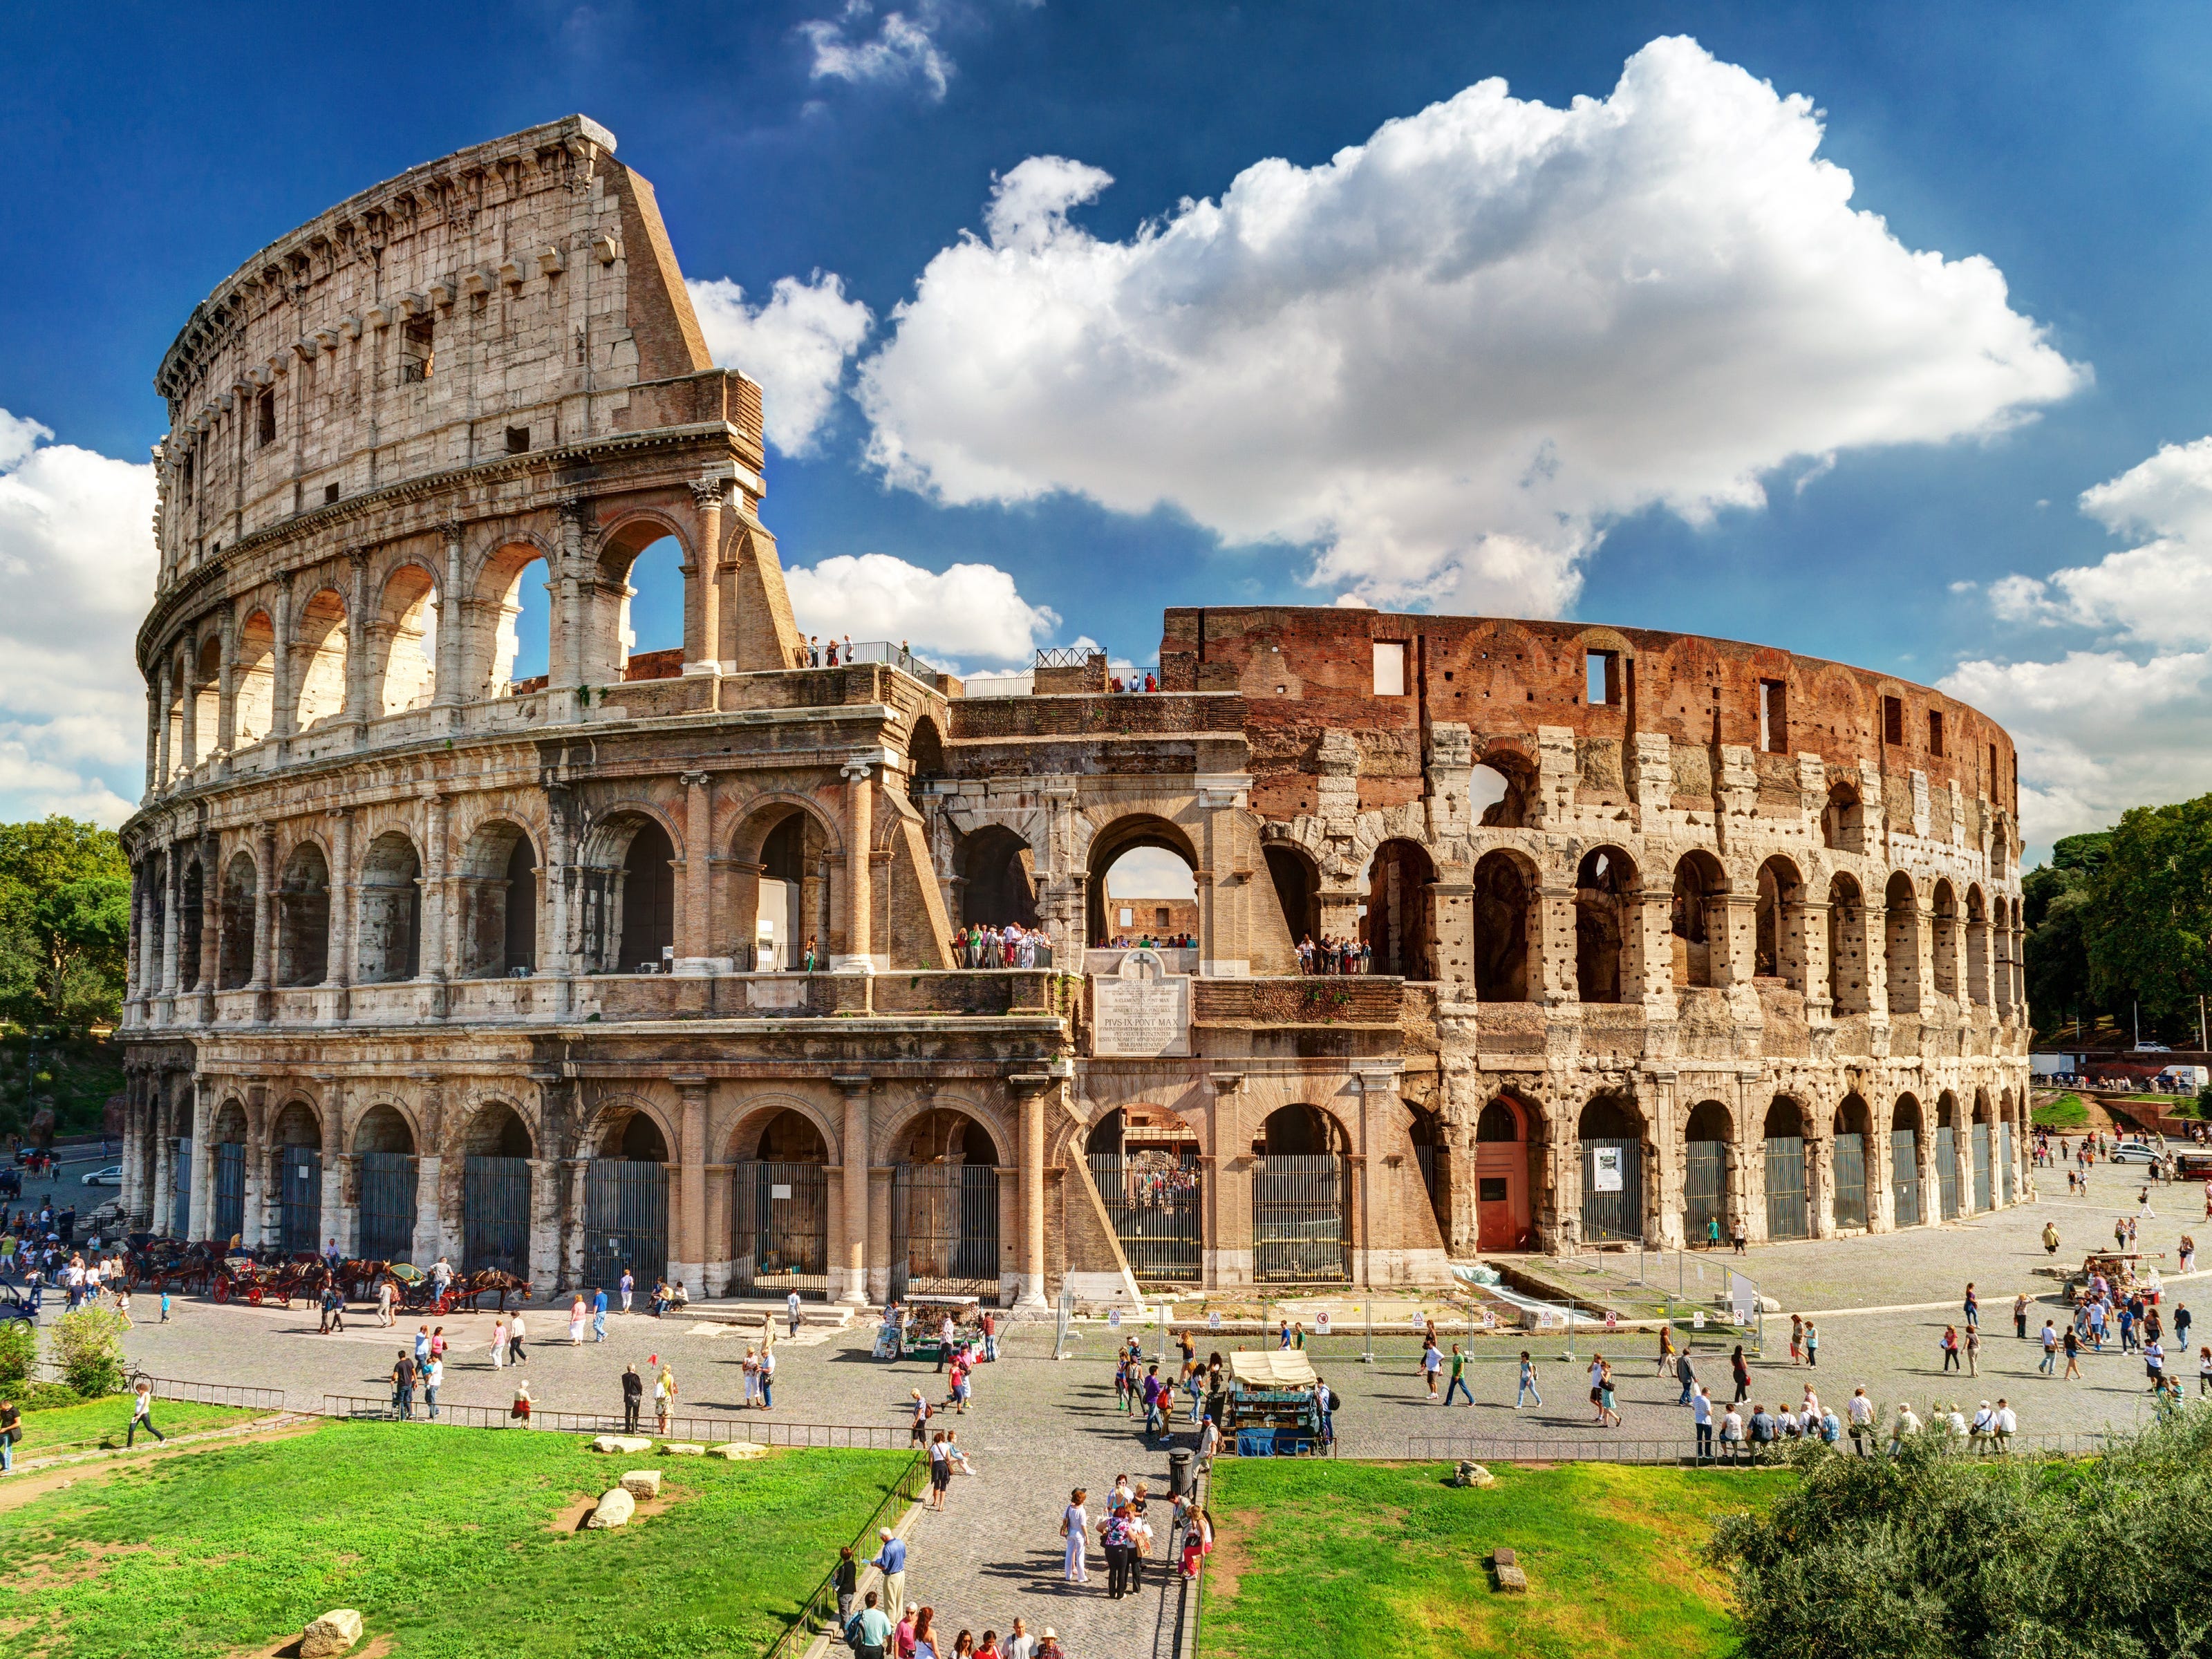 <p><span>As iconic as it may be, the Colosseum can be overwhelming, particularly during </span><a href="https://www.businessinsider.com/peak-off-season-travel-destination-photos-2018-8"><span>peak tourist seasons</span></a><span>. </span></p><p><span>Its historical significance is undeniable, but exploring the ancient amphitheater can be a challenge among the swarms of visitors. </span></p><p><span>Acquiring tickets is also tricky. We often have to time our online purchases perfectly, refreshing the page in 10-minute intervals. Tickets sell out quickly and are sometimes resold by large companies. </span></p><p><span>Consider alternative viewpoints or</span> <a href="https://www.contexttravel.com/cities/rome/tours/roma-antica-colosseum-roman-forum-and-palatine-hill-tour-with-skip-the-line-tickets"><span>guided tours</span></a><span> for a more personalized experience. I also like taking in the exterior around 9 a.m. or in the evening when it lights up.</span></p>